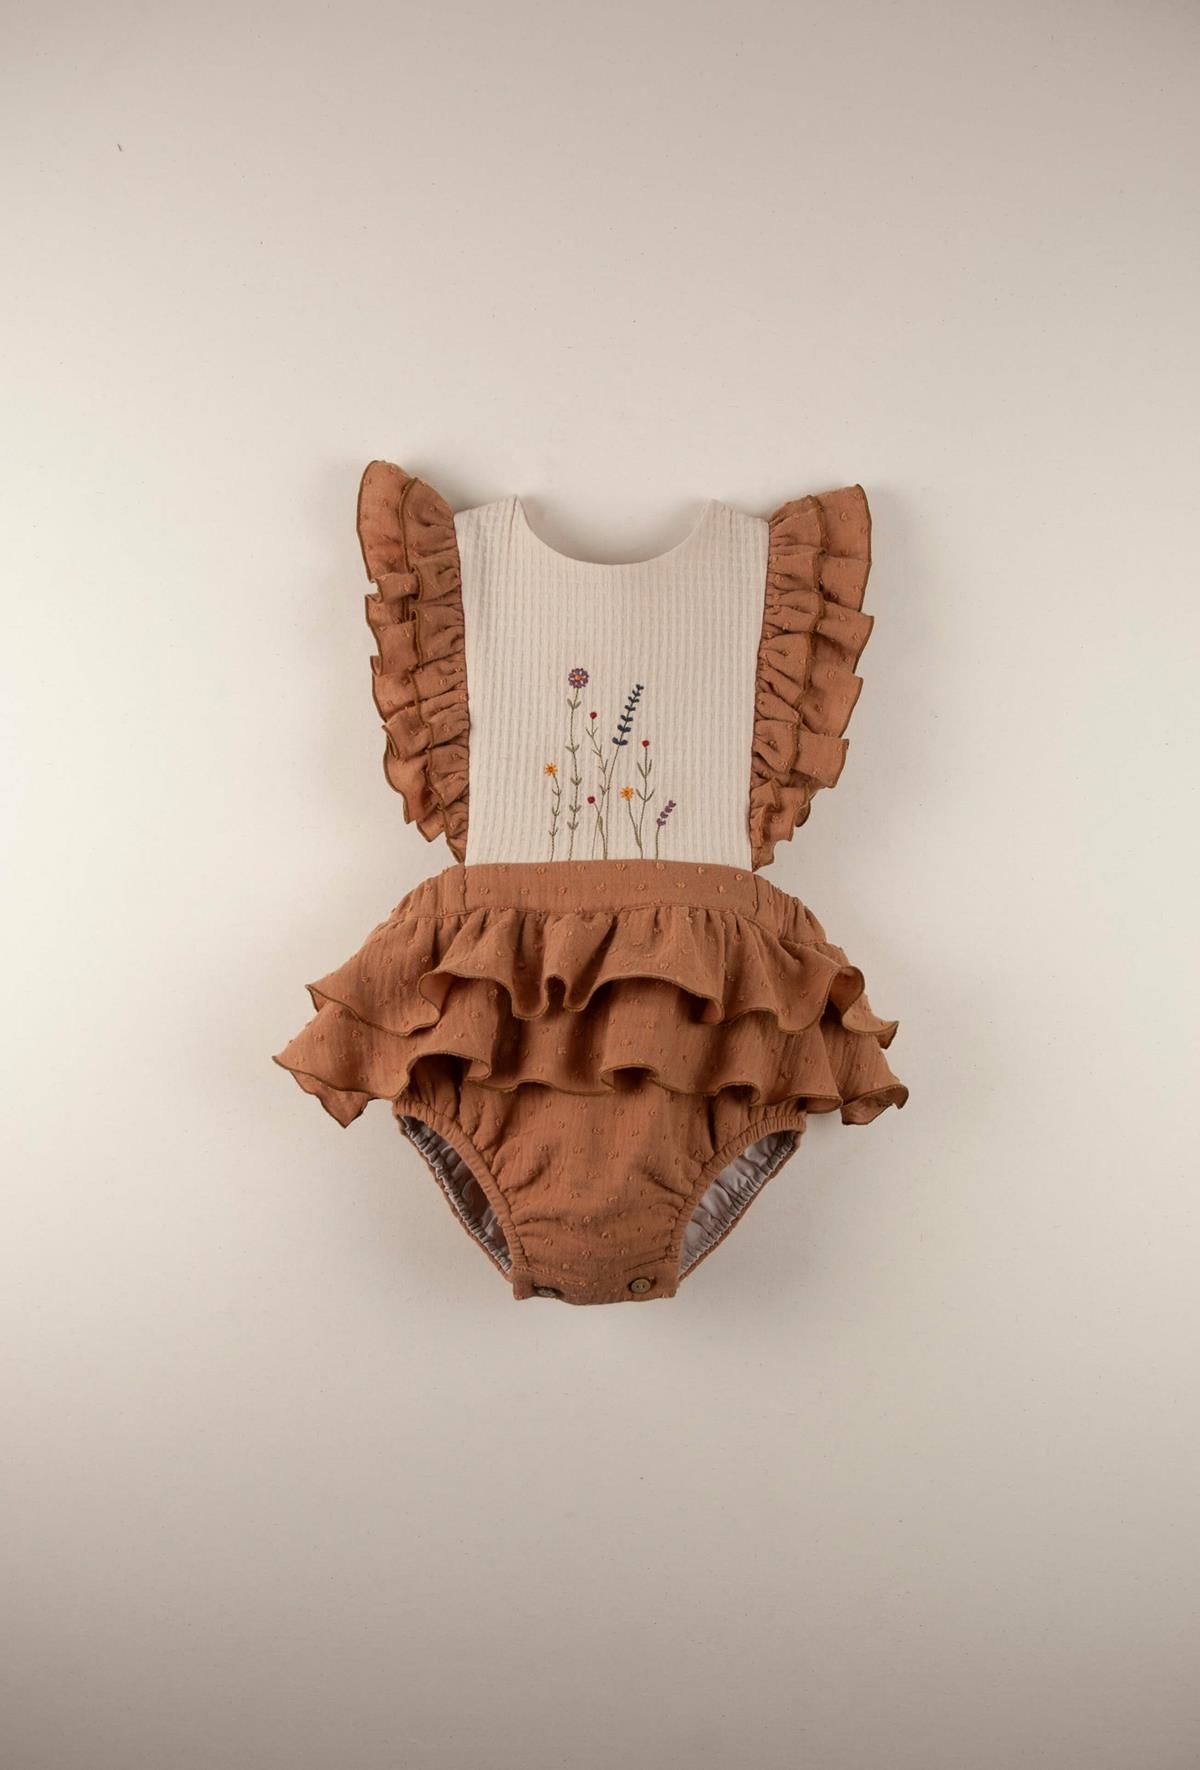 Mod.6.1 Terracotta romper suit with embroidered bib | SS22 Mod.6.1 Terracotta romper suit with embroidered bib | 1